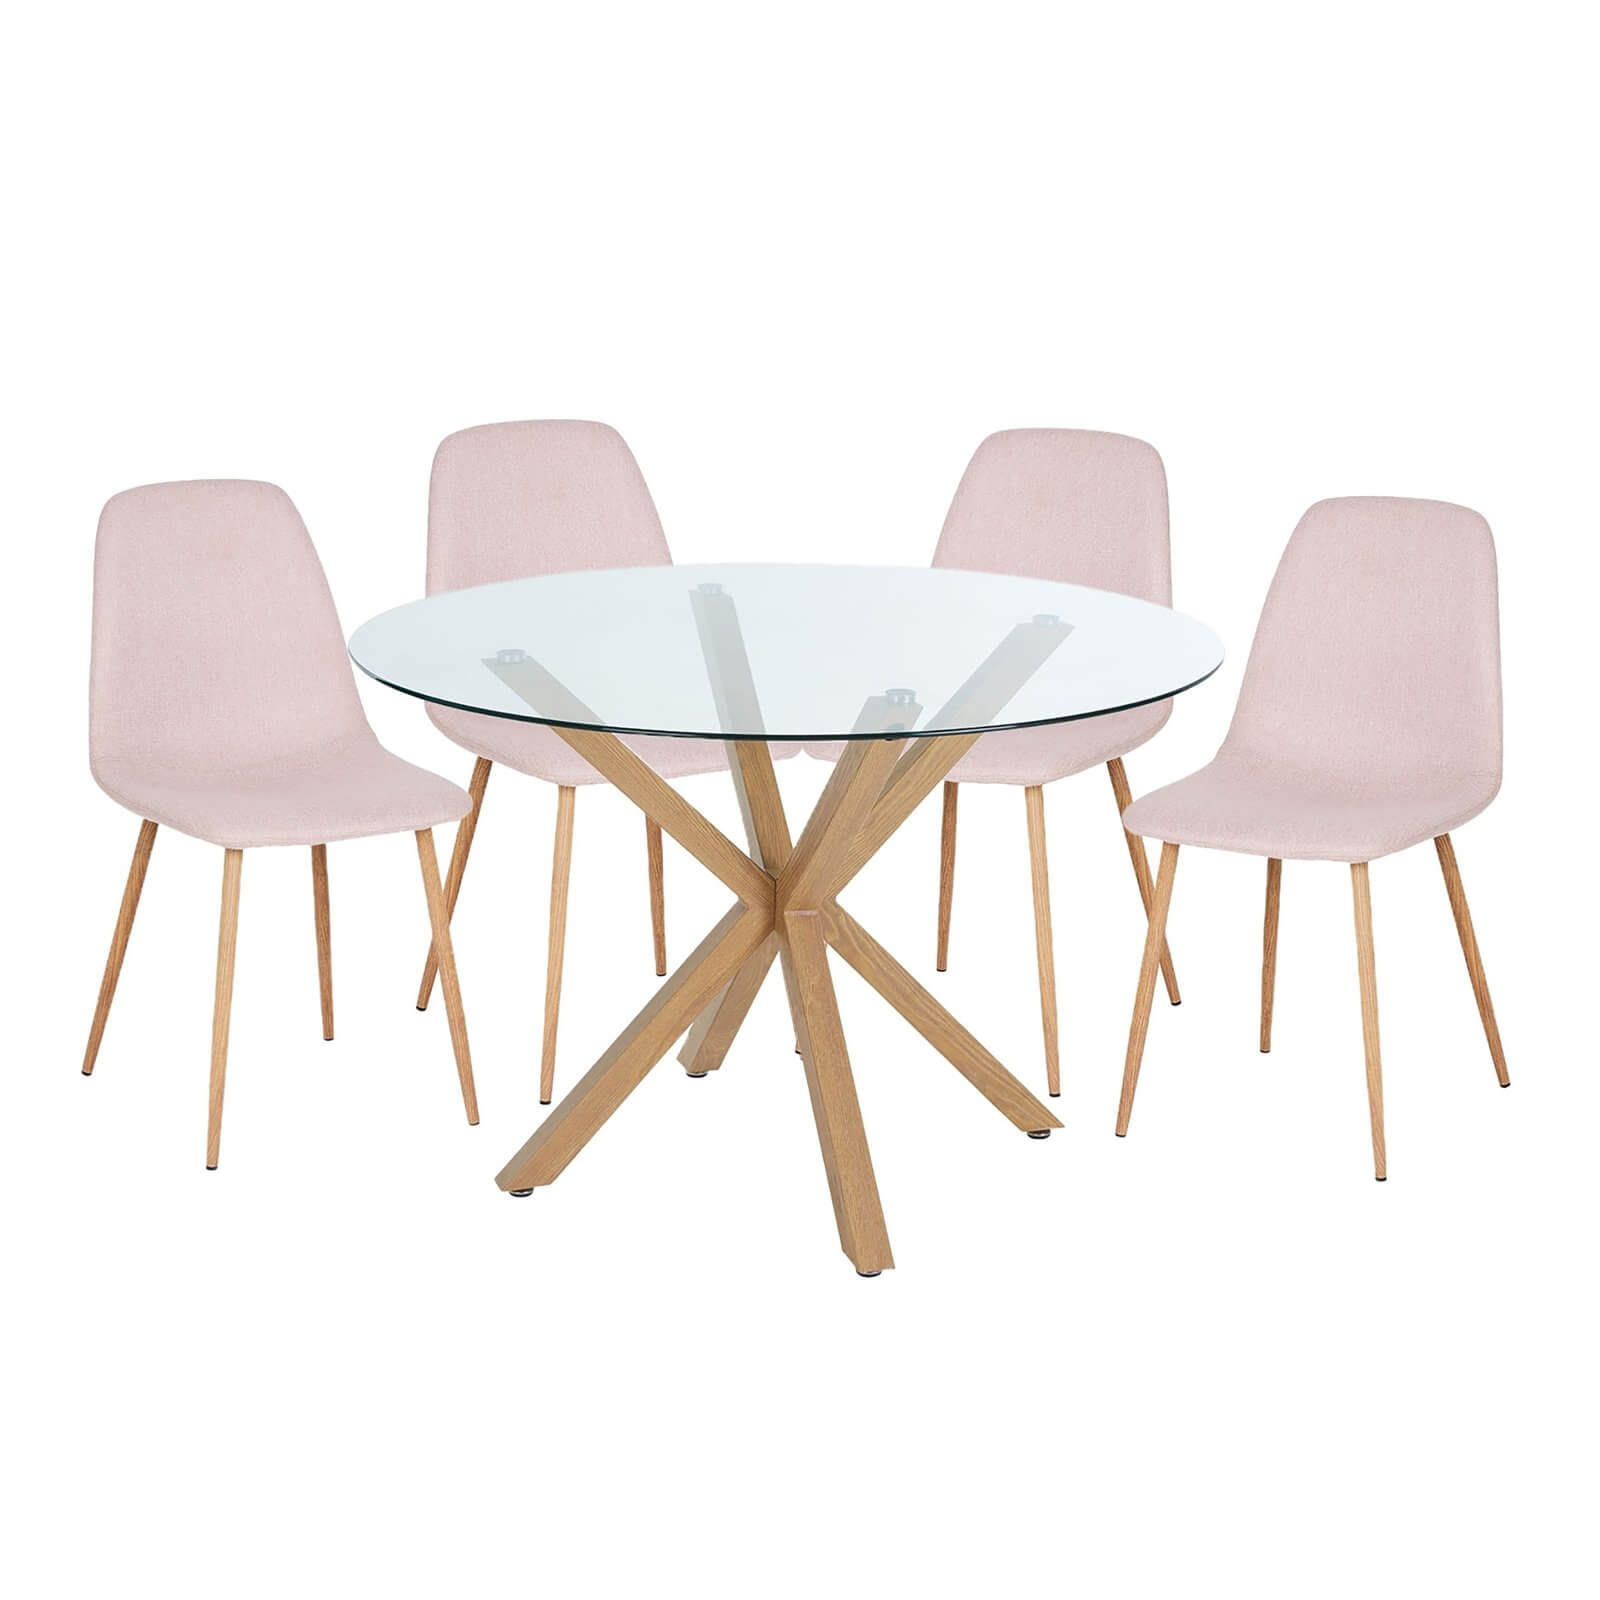 Photo of Ludlow Round Dining Table And 4 Chairs - Pink